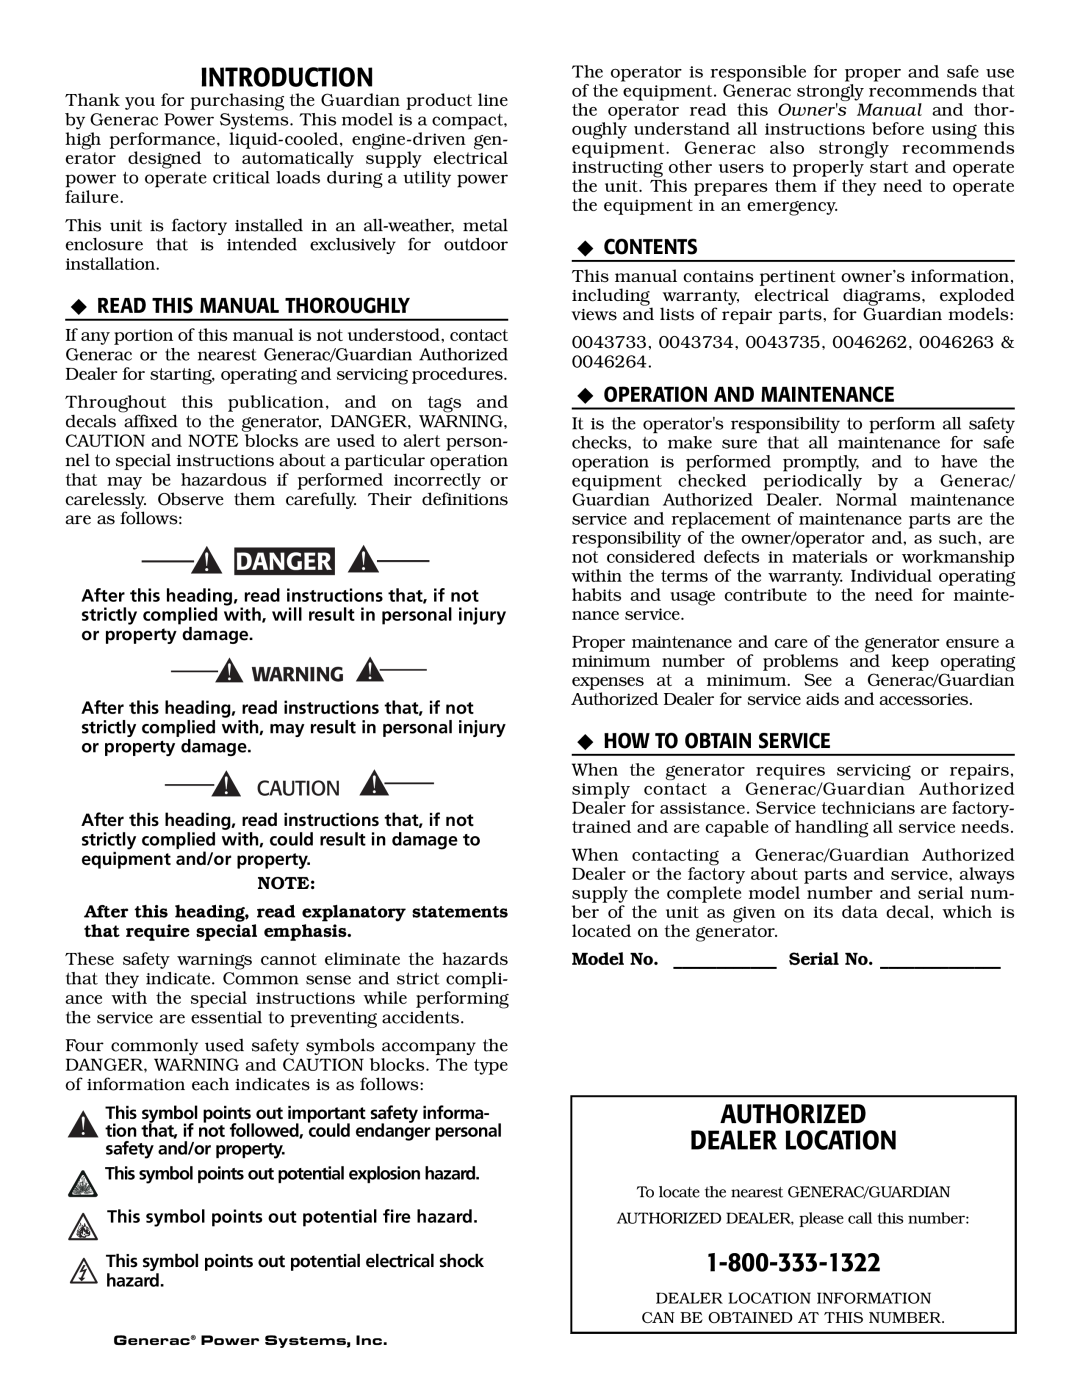 Generac Power Systems 46263 Introduction, Authorized Dealer Location, Danger, ‹ Read This Manual Thoroughly, ‹ Contents 